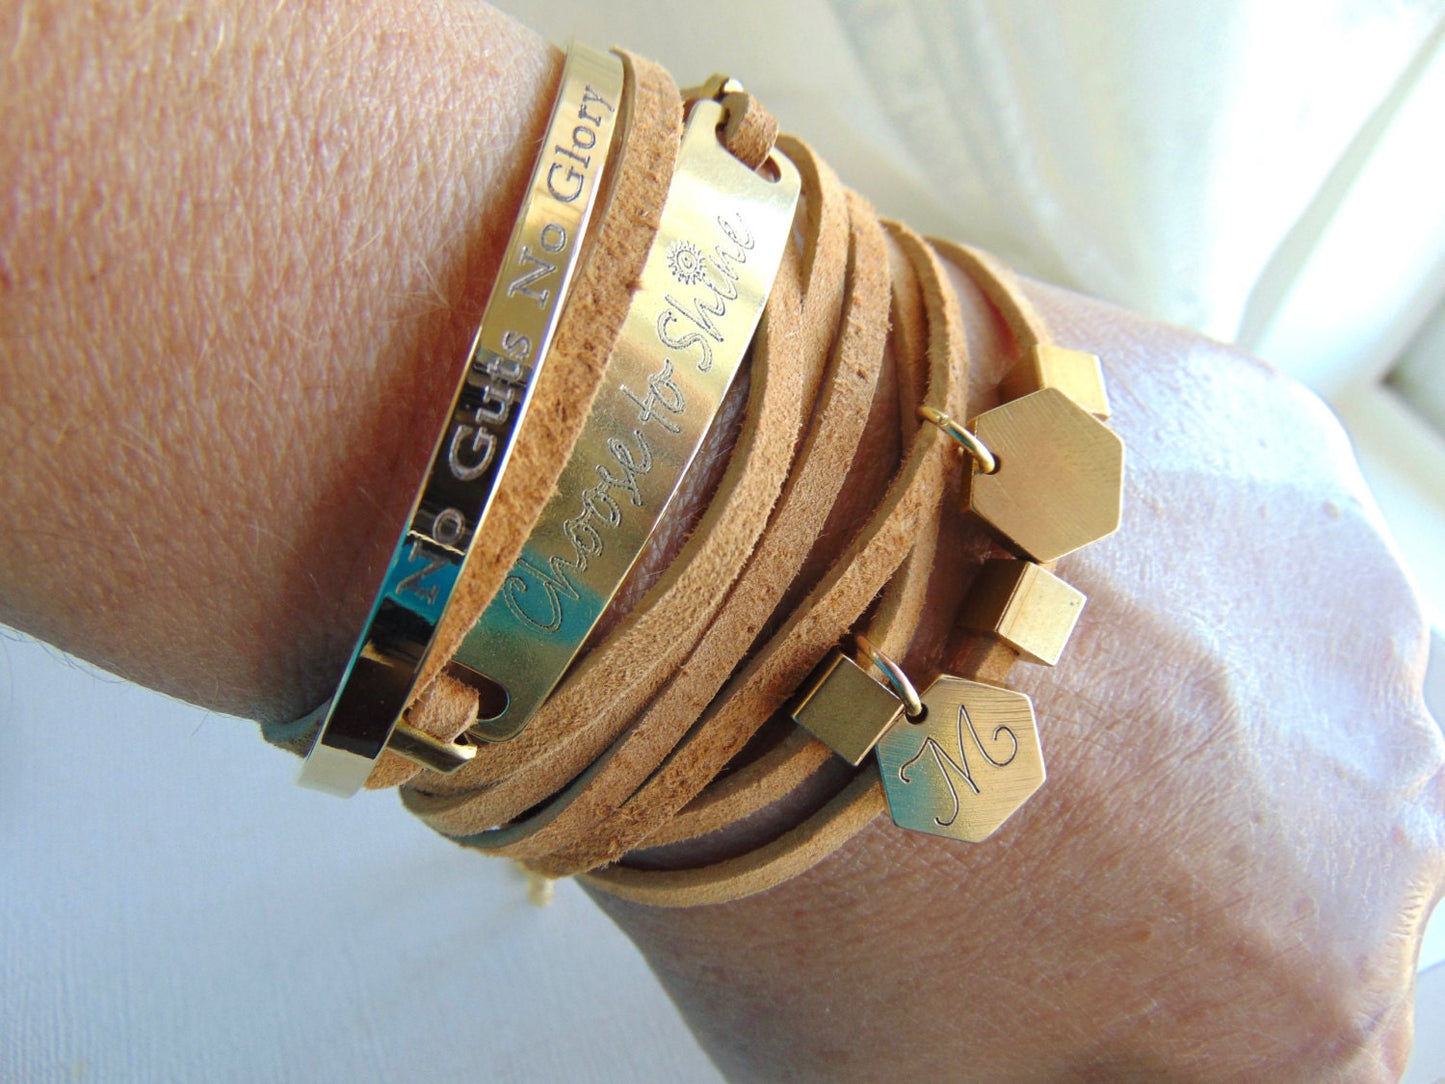 Choose to Shine - Engraved quote on Brass and Leather wrap bracelet